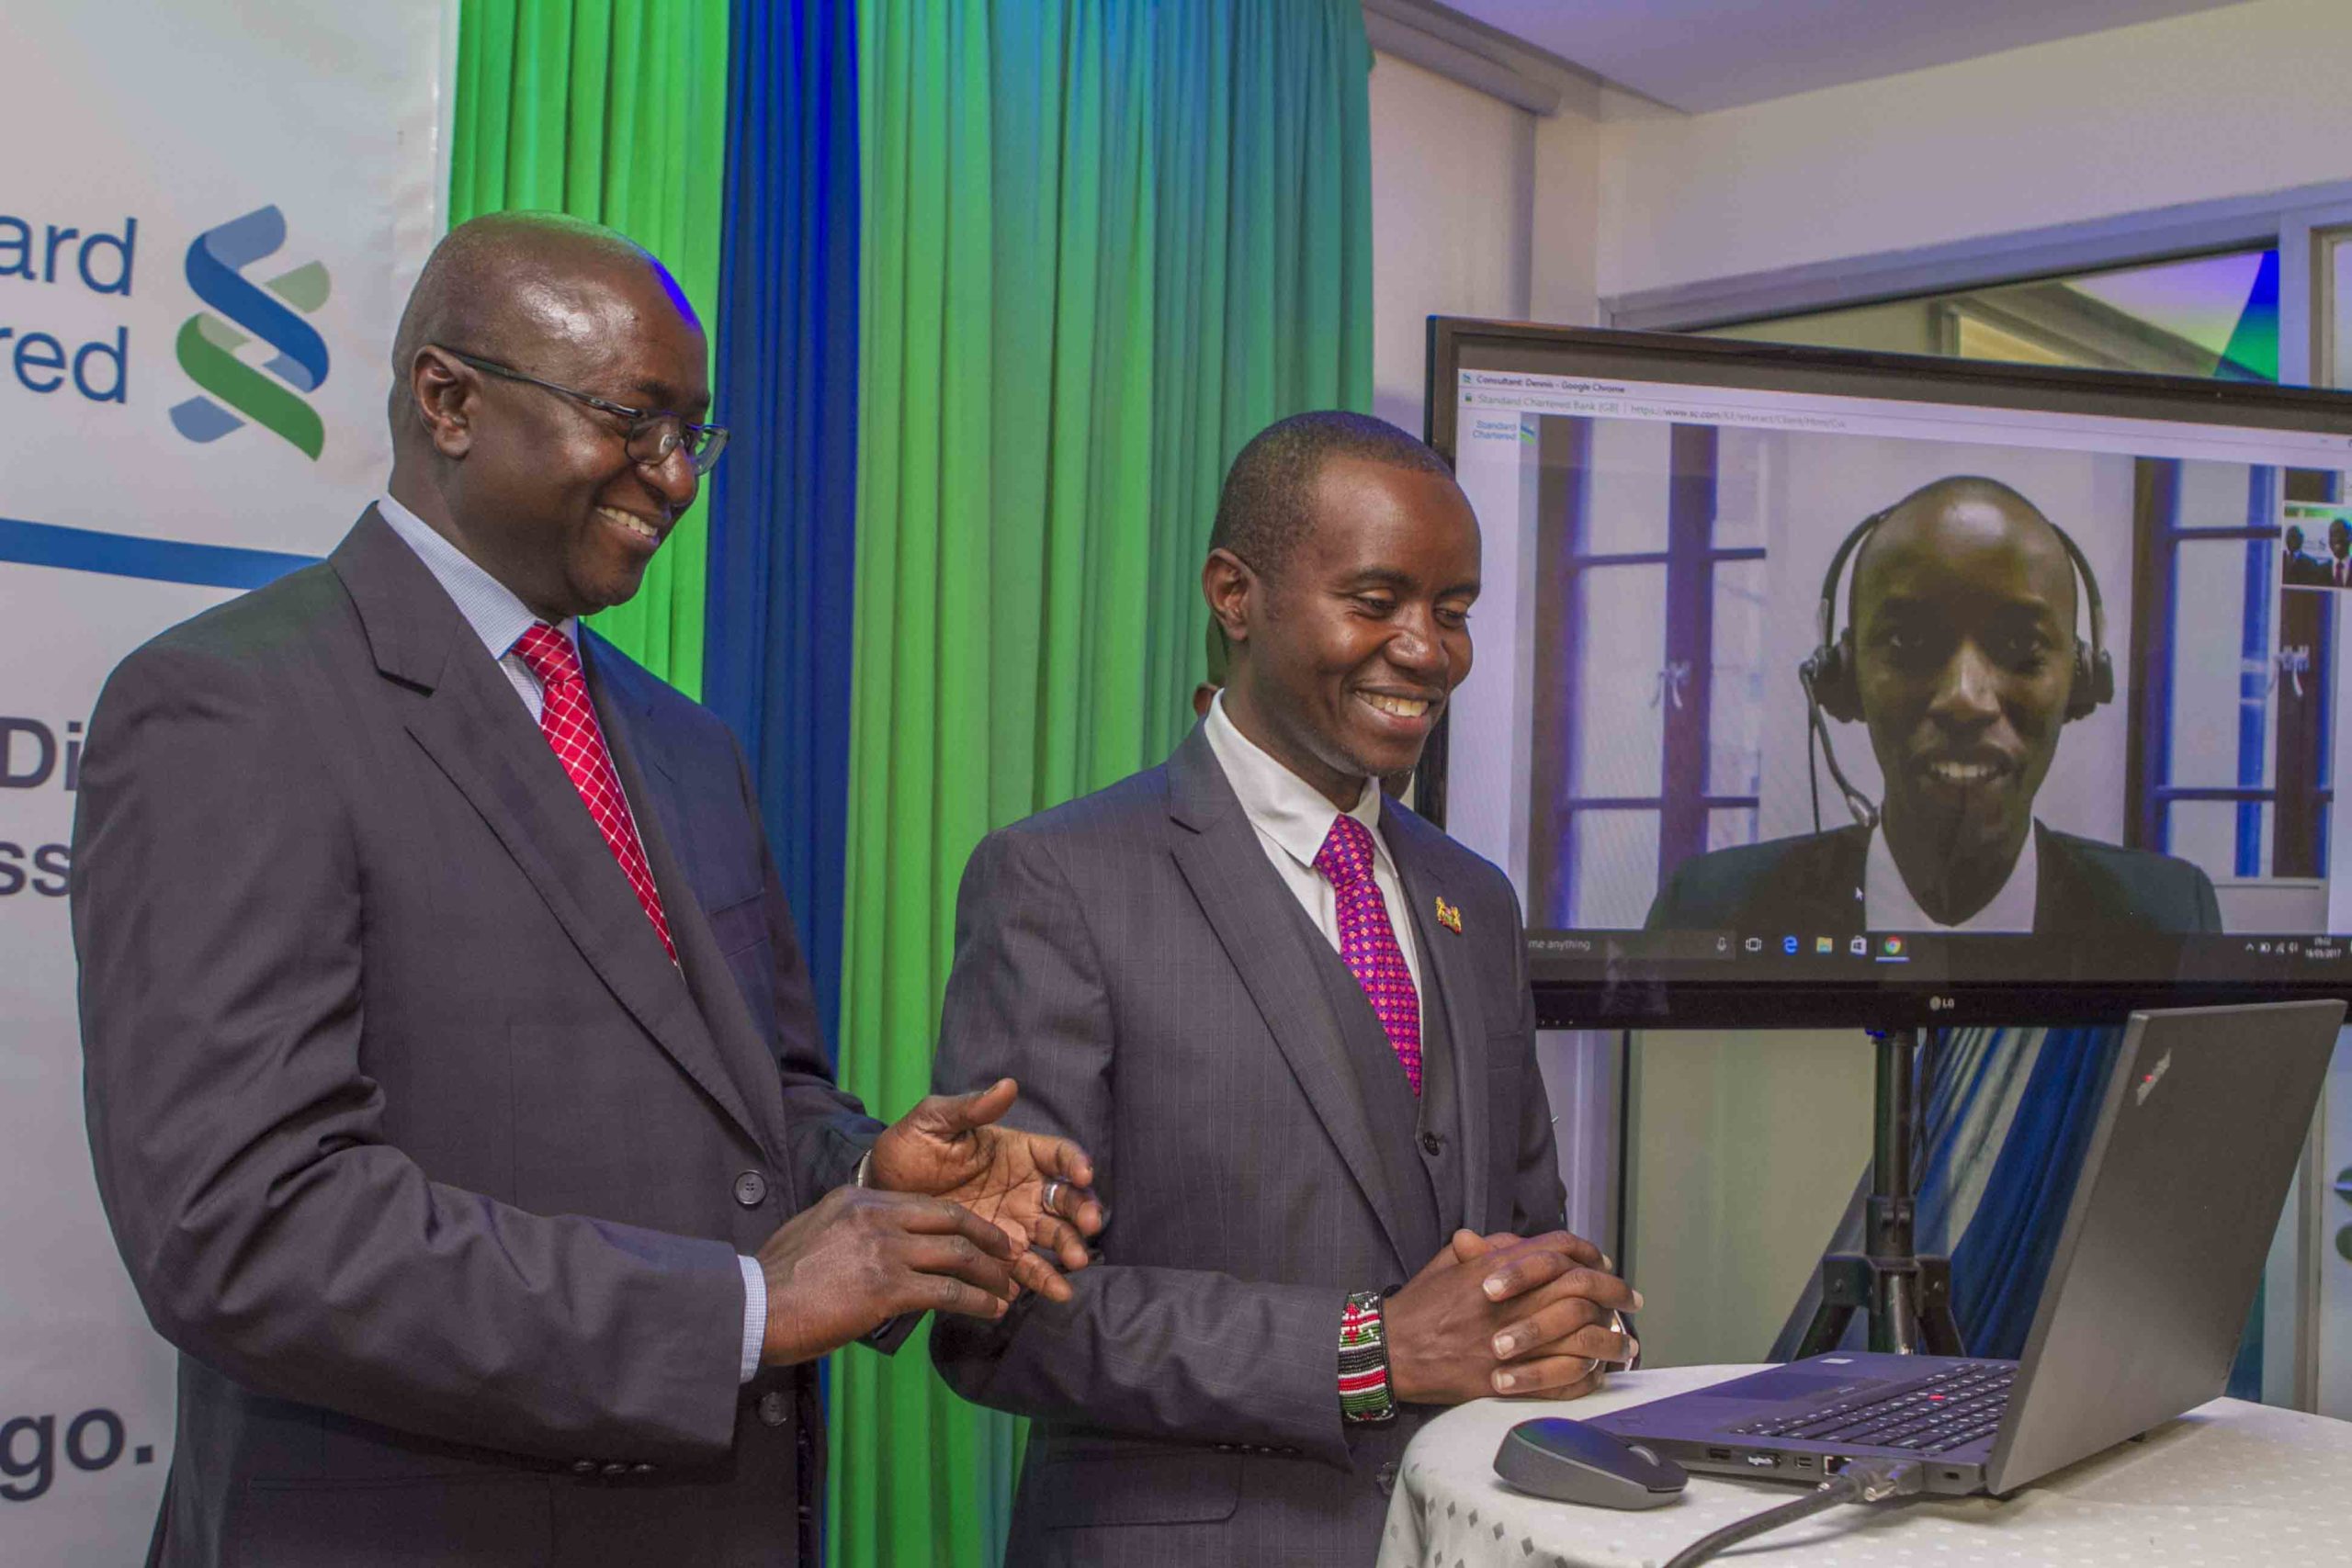 Standard Chartered Bank Kenya and East Africa Lamin Manjang (left) and ICT Cabinet Secretary Joe Mucheru during the launch of the bank's video banking services